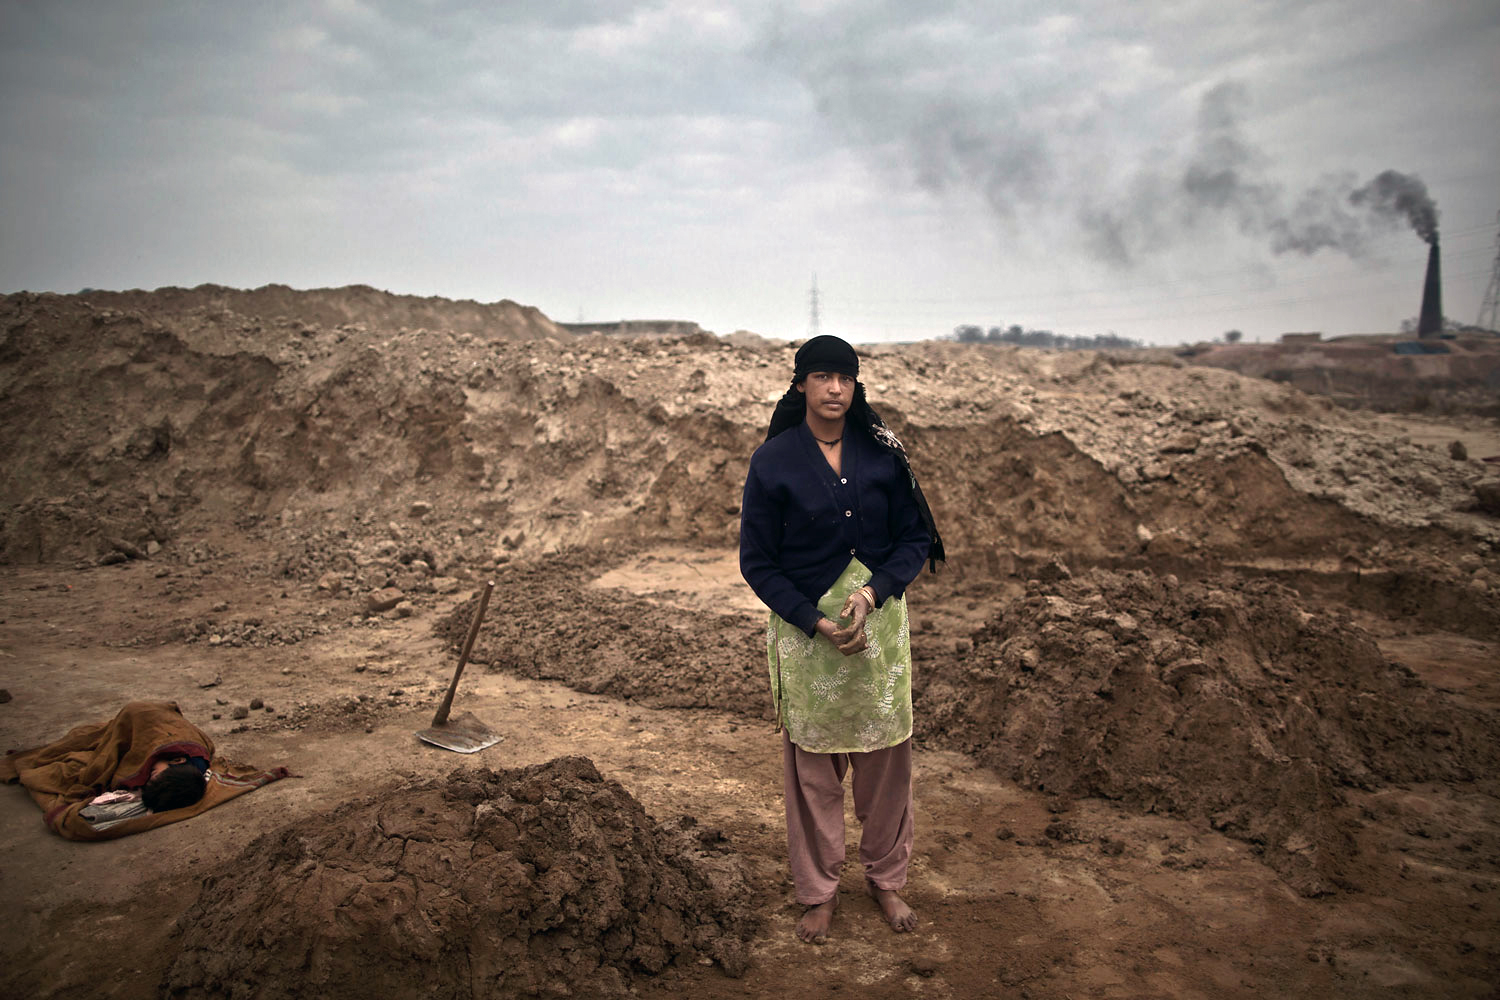 With her son Adil, 6, who suffers from a fever, sleeping on the ground wrapped with a shawl, Najma Shahid, 25, a Pakistani brick factory worker, poses for a picture at the site of her work in Mandra, near Rawalpindi, Pakistan. Najma and her husband are in debt to their employer the amount of 80,000 rupees (approximately $800).